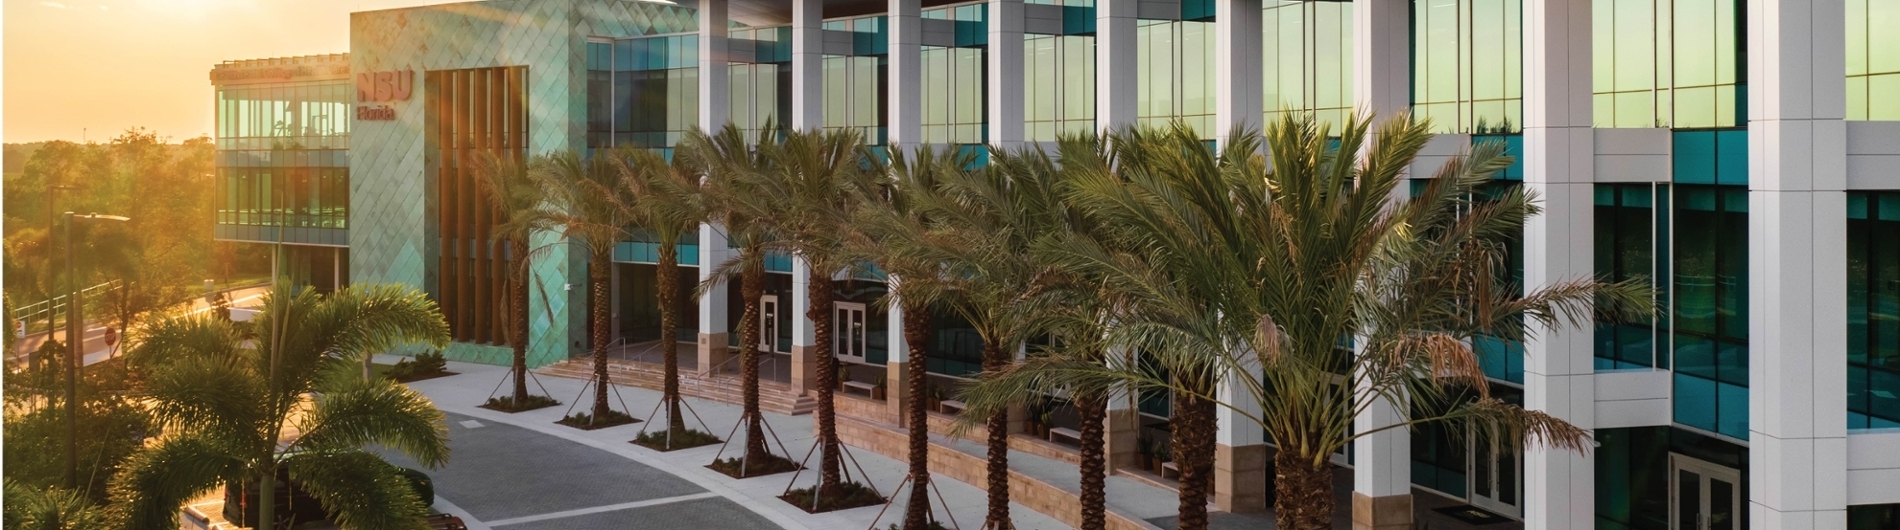 Front of Tampa Bay Regional Campus